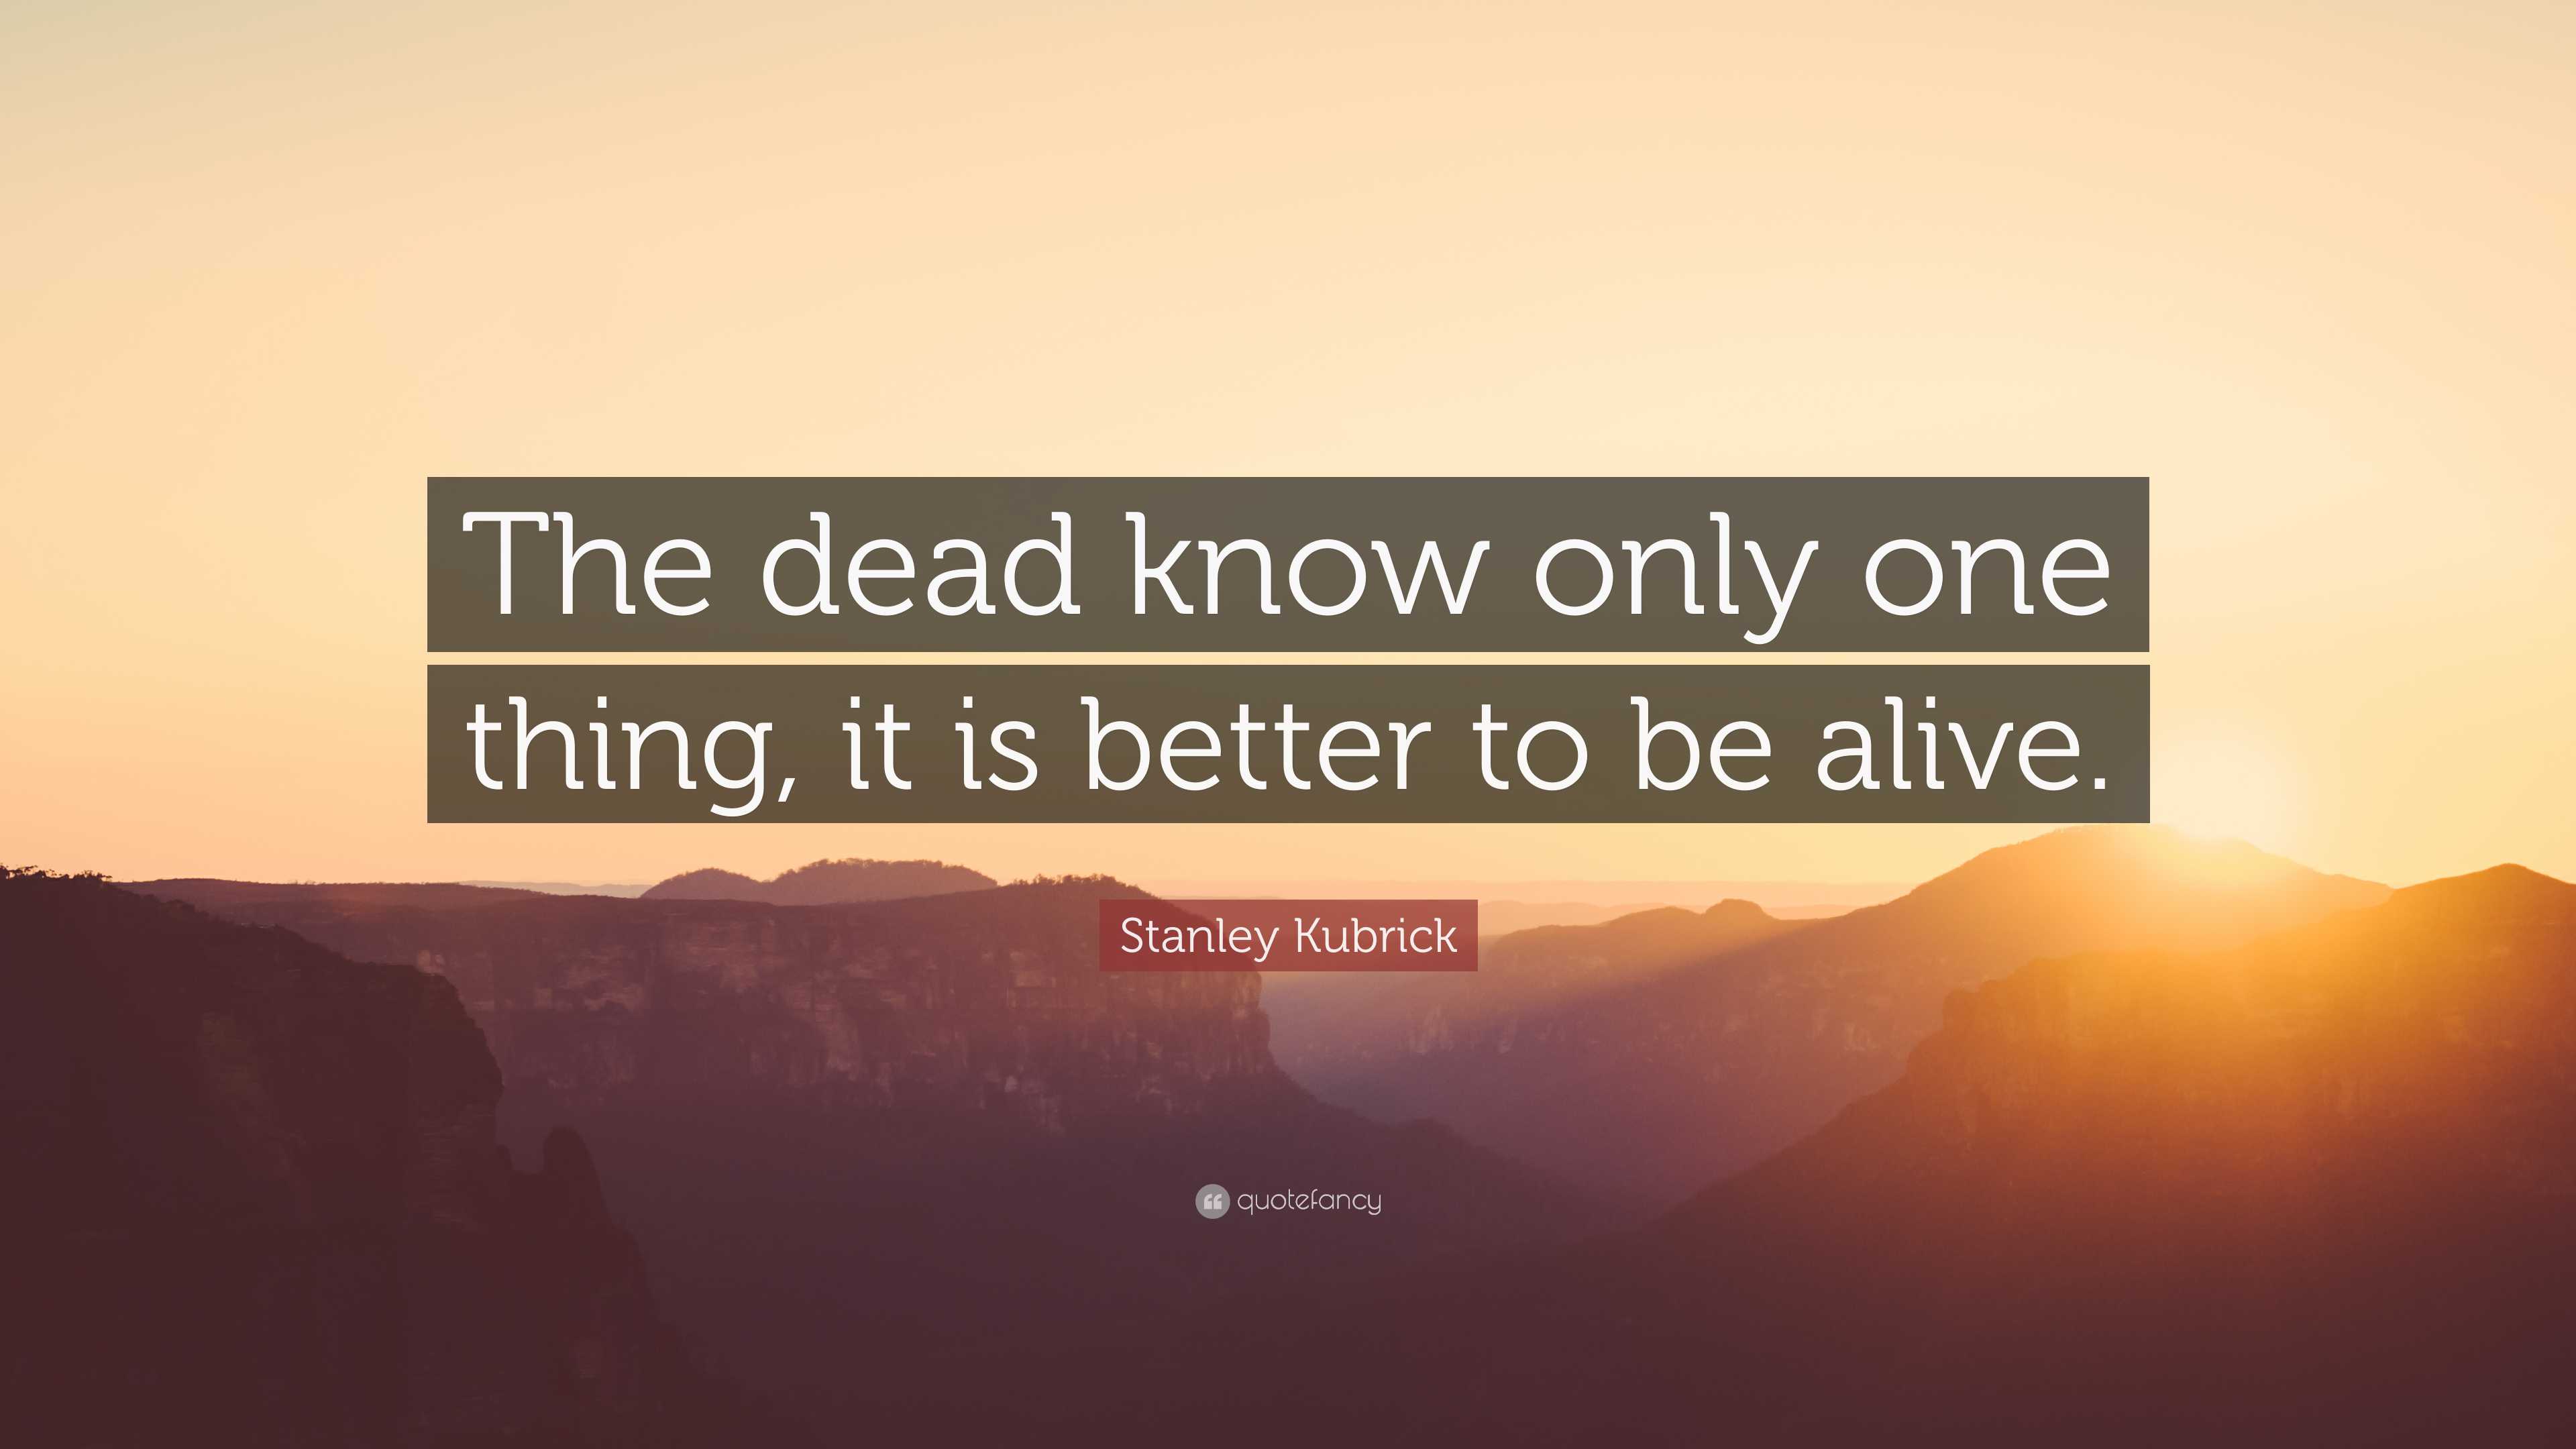 Stanley Kubrick Quote: “The dead know only one thing, it is better to ...